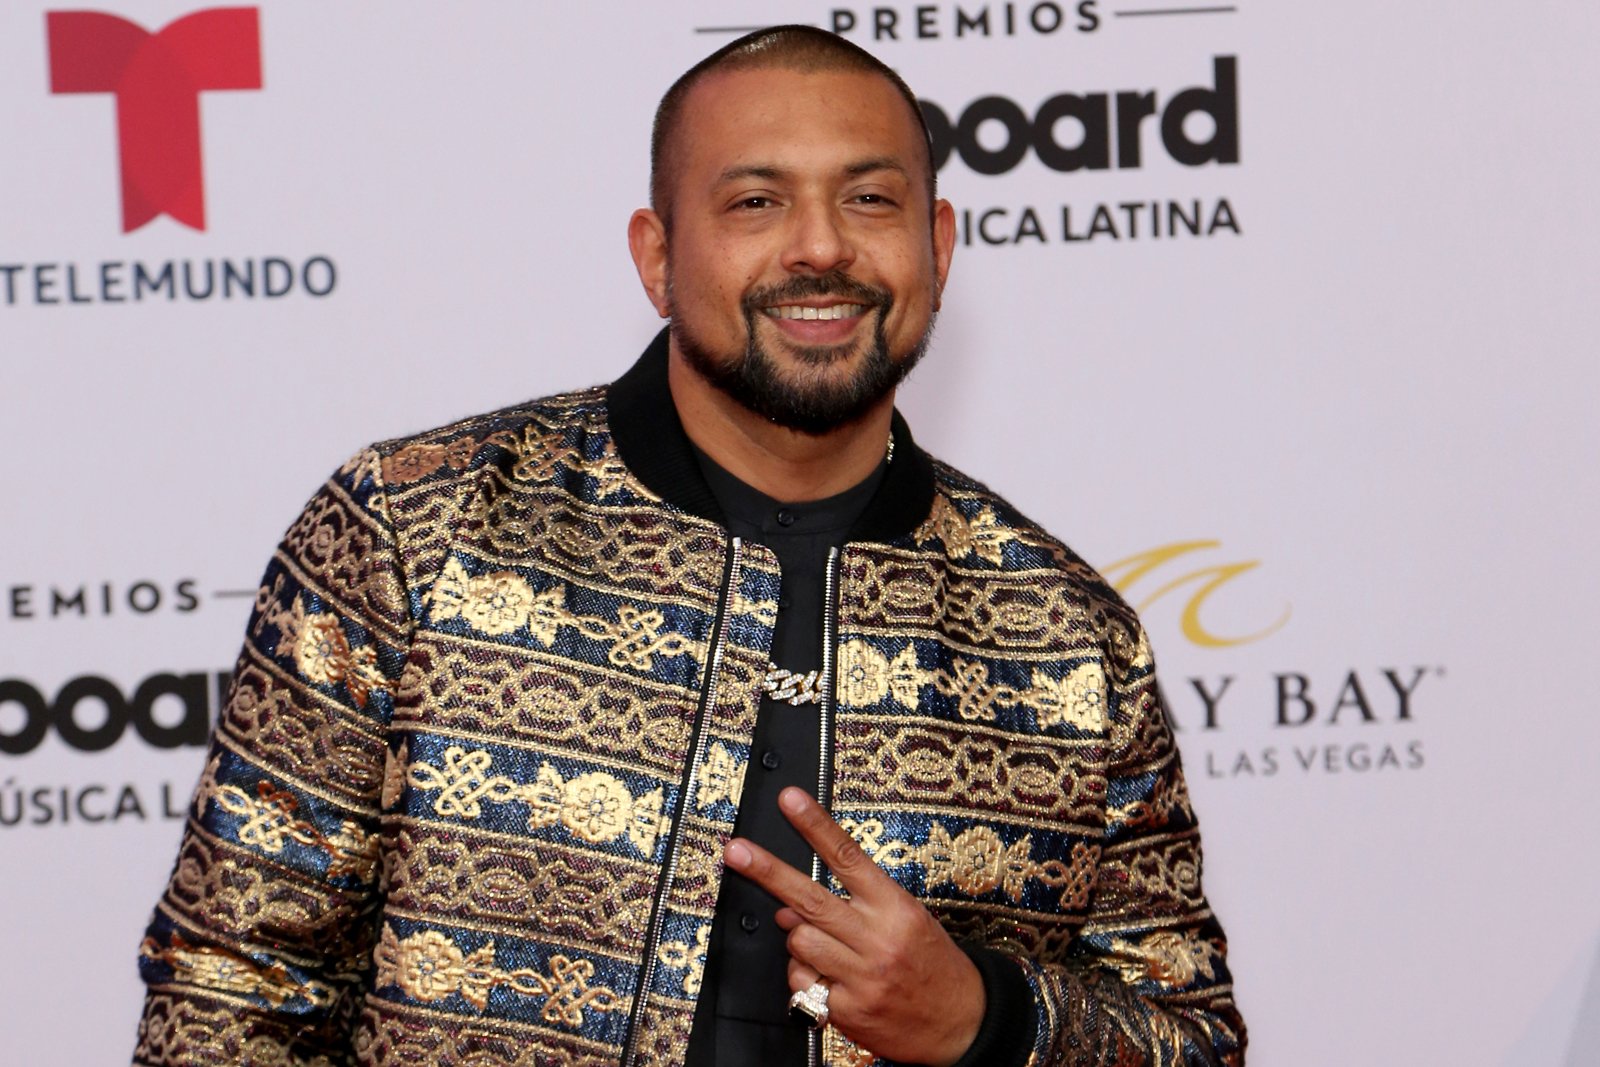 Who Has The Higher Net Worth: Sean Paul Or Shaggy?